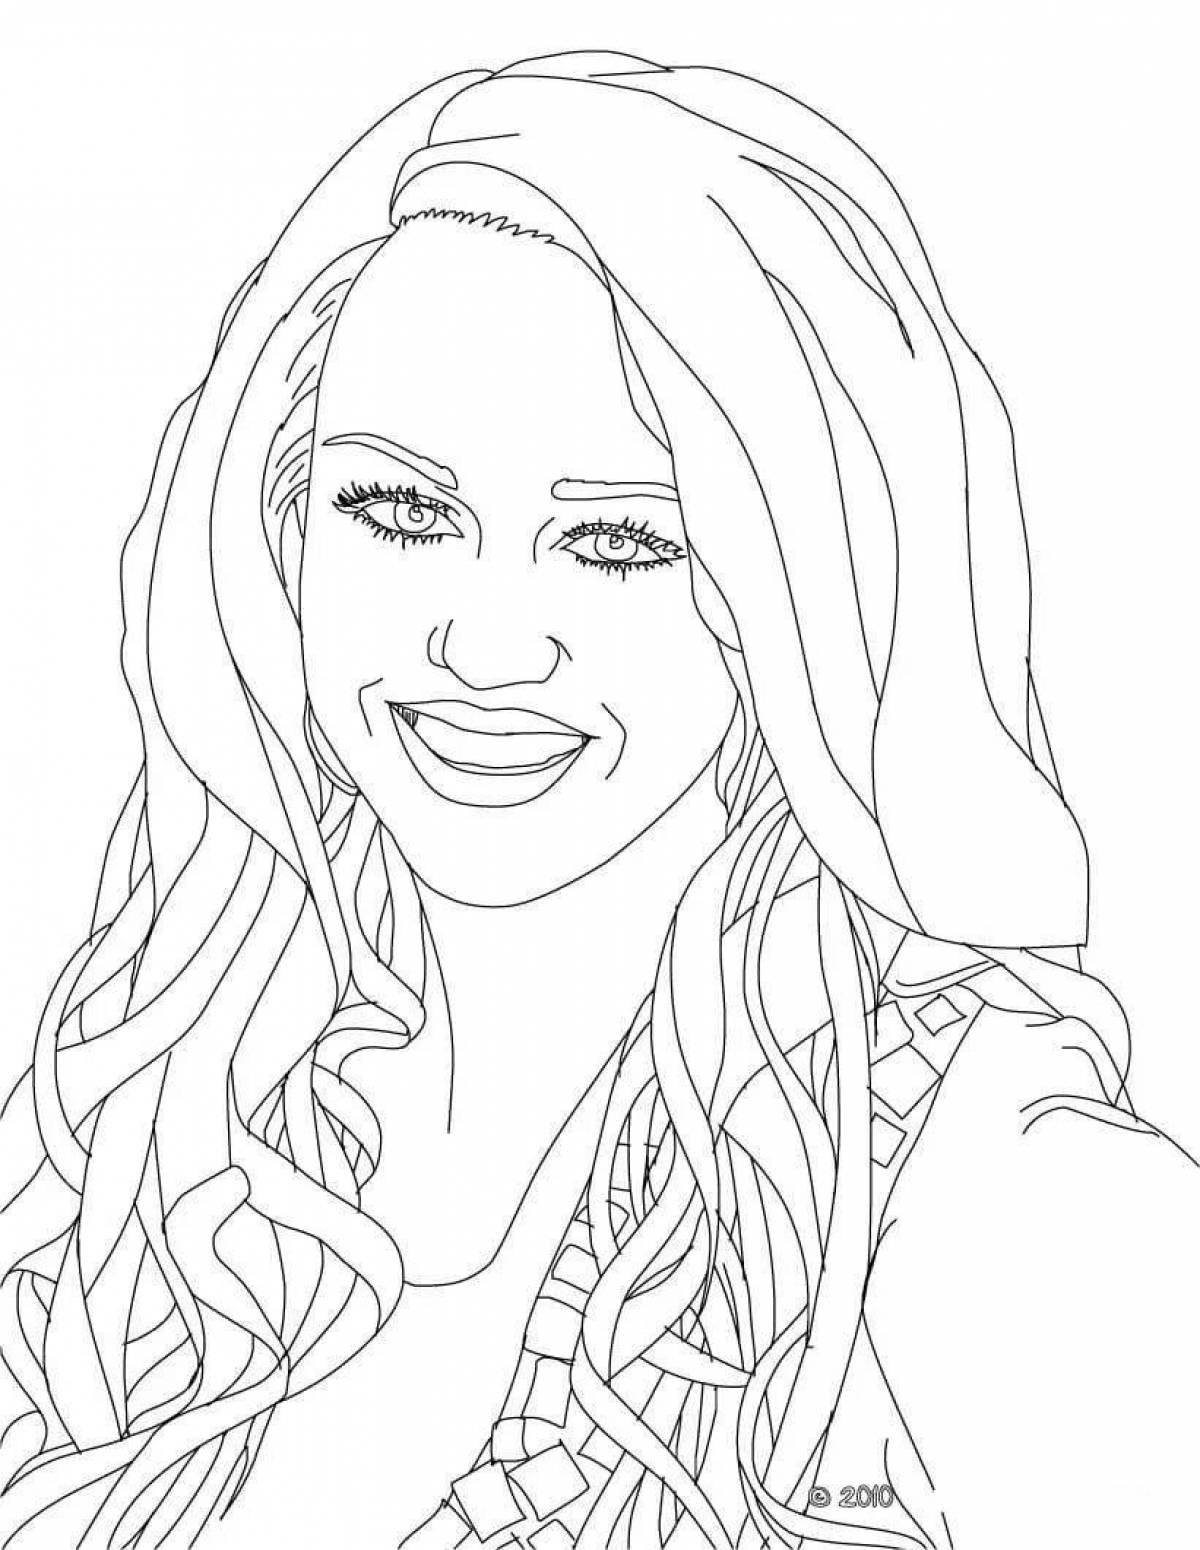 Bianca brightly colored coloring page